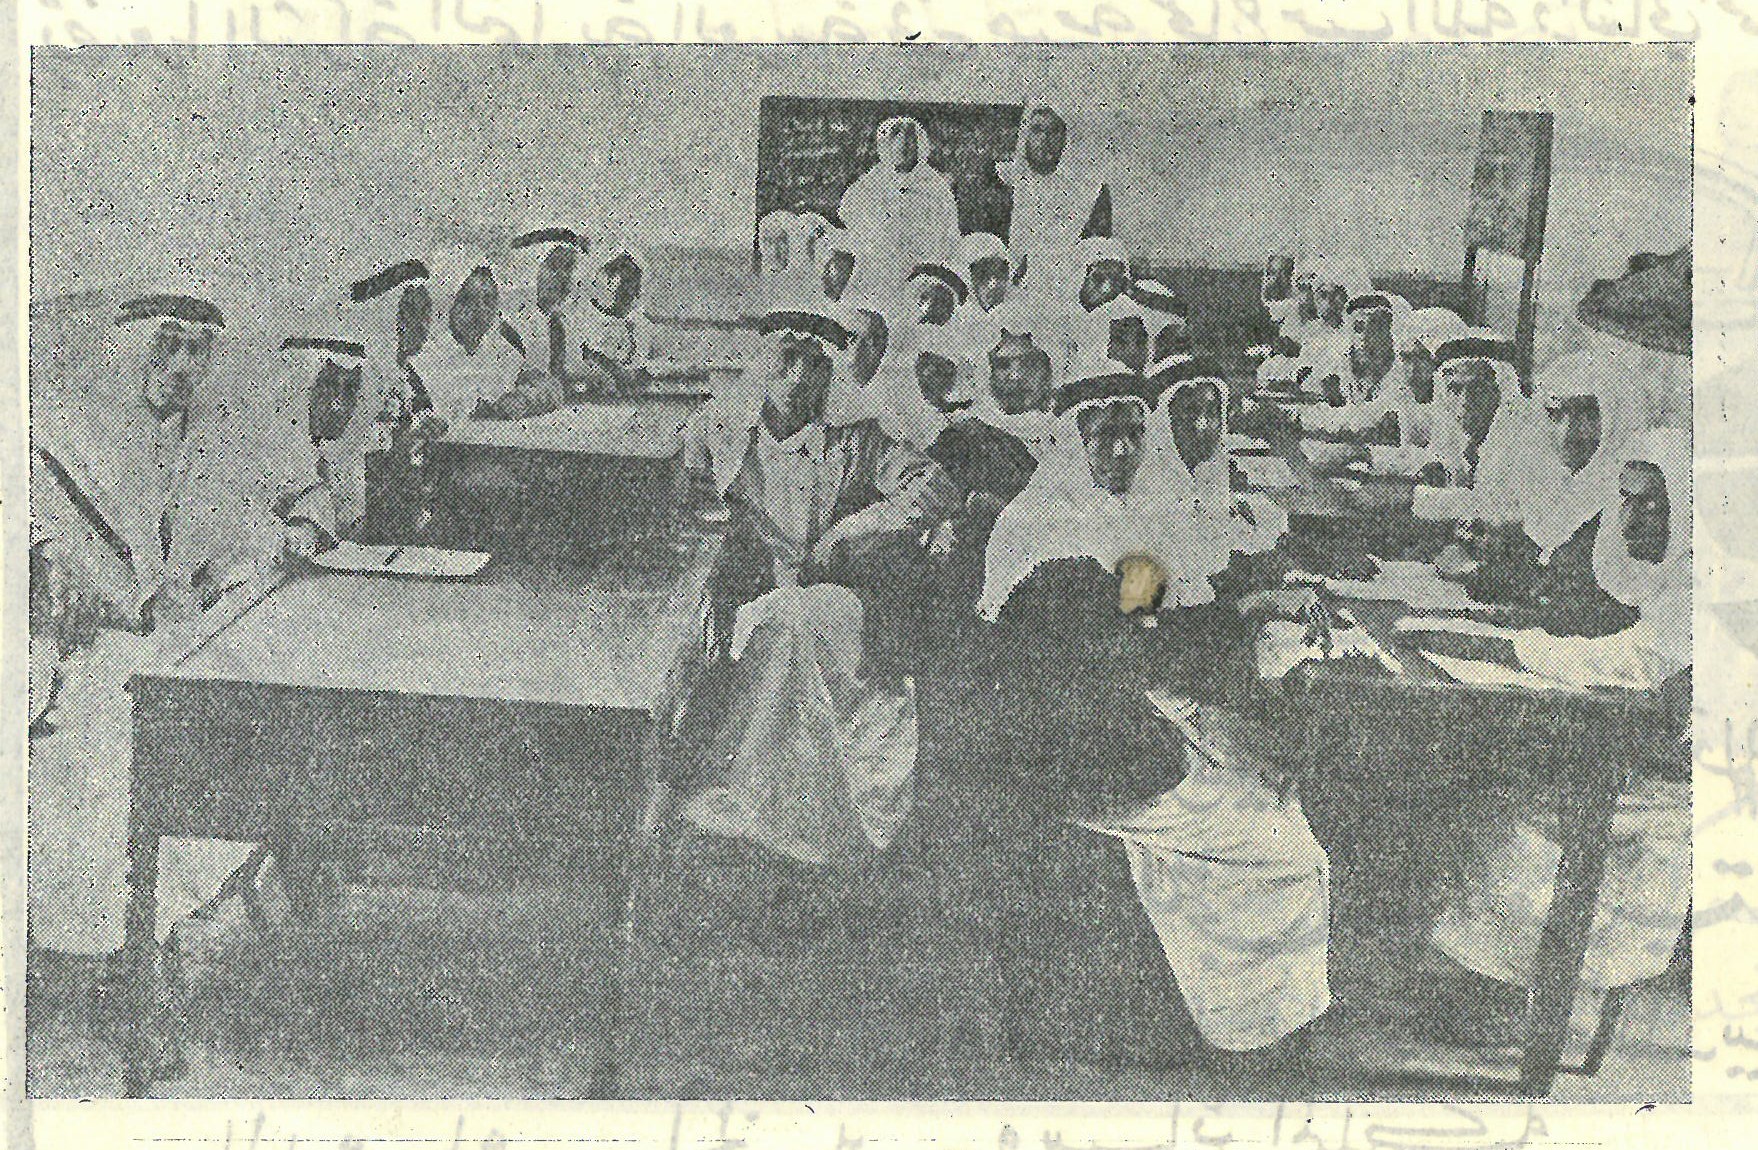 Students in Mecca 1954